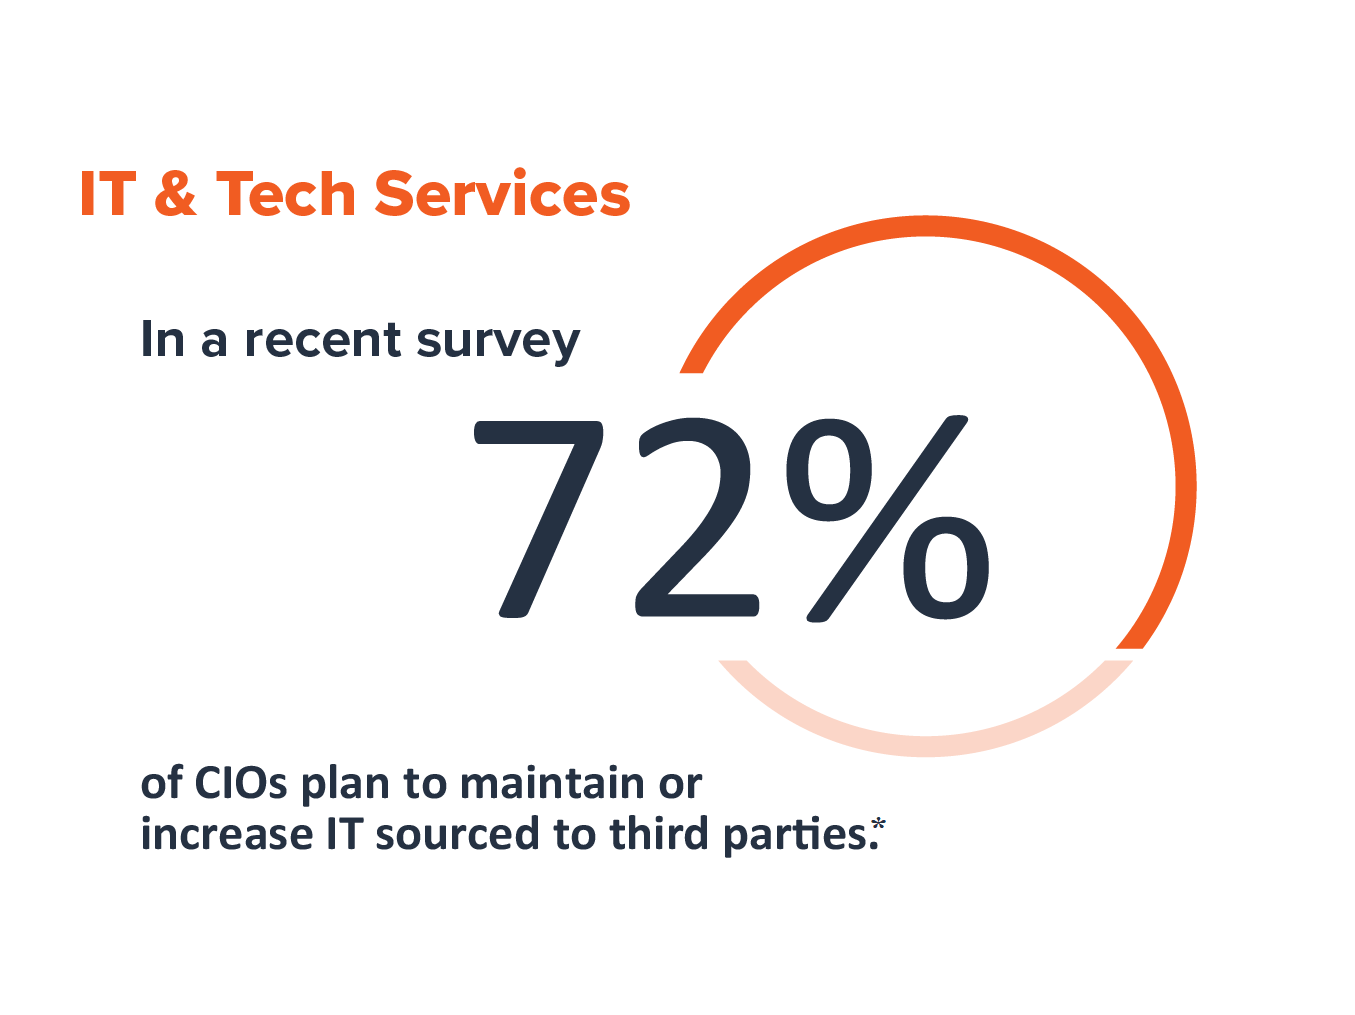 Challenges in the Technology Services Industry